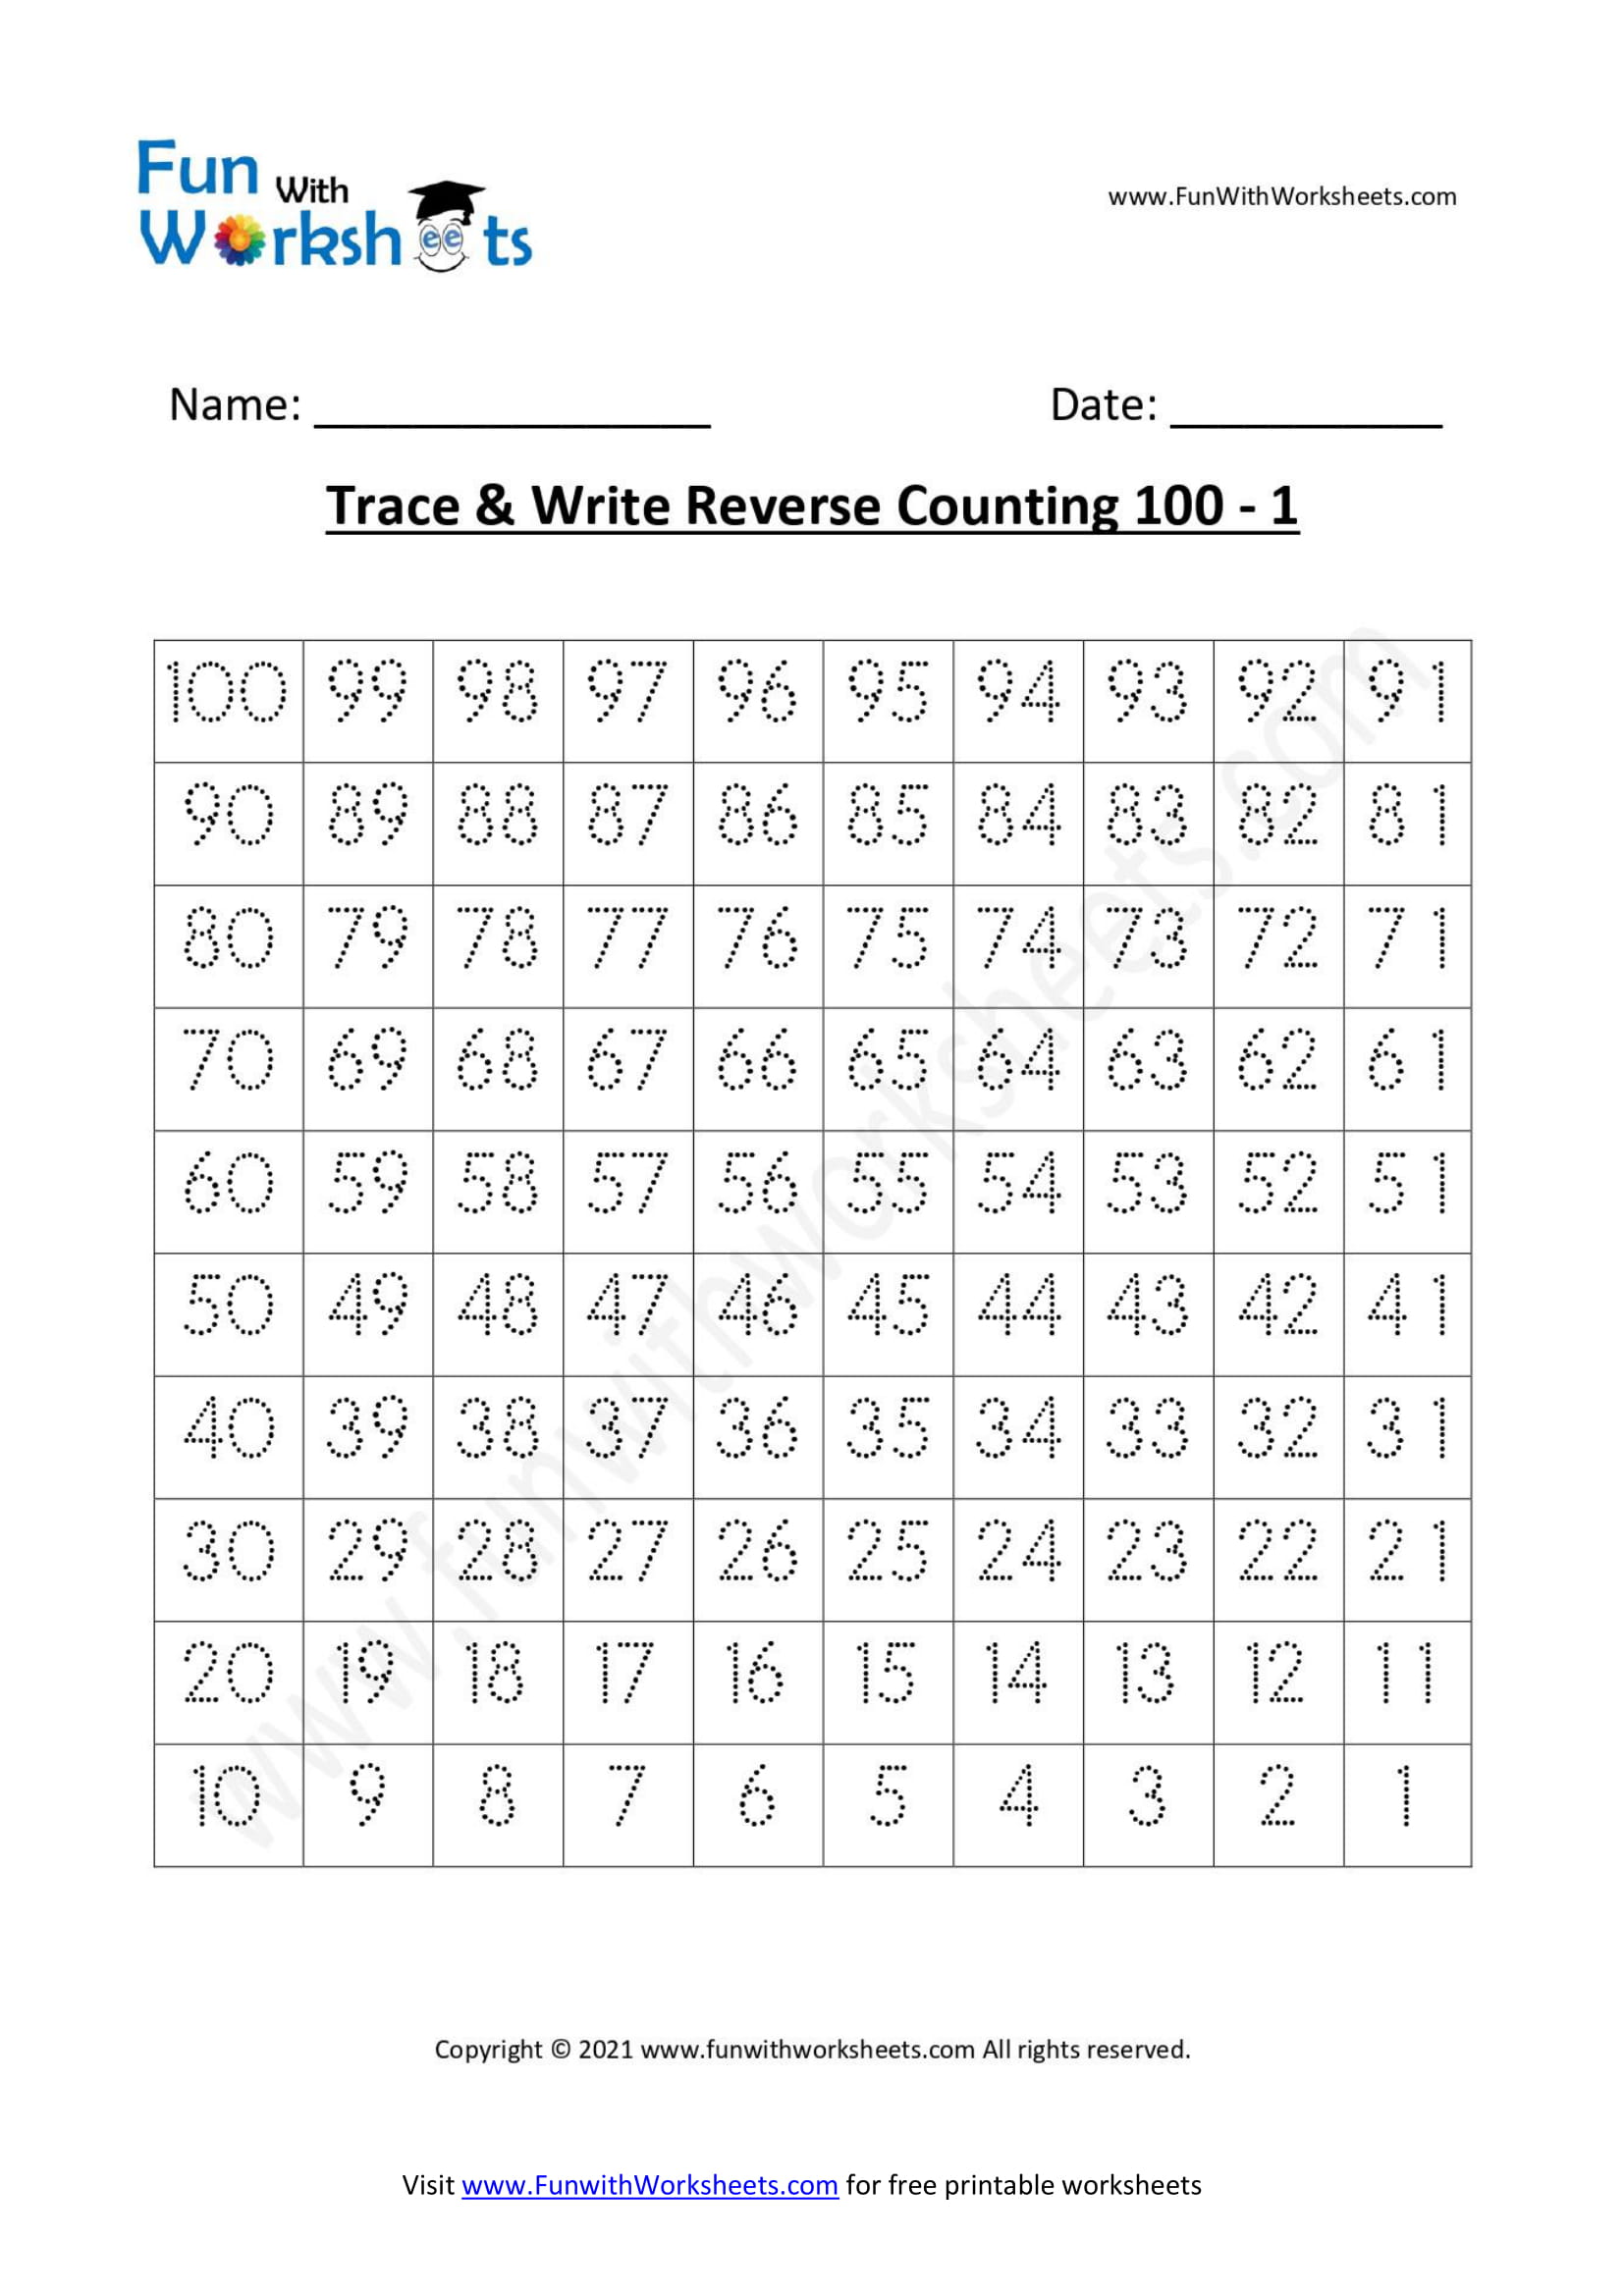 trace-and-learn-reverse-counting-practice-worksheets-100-1